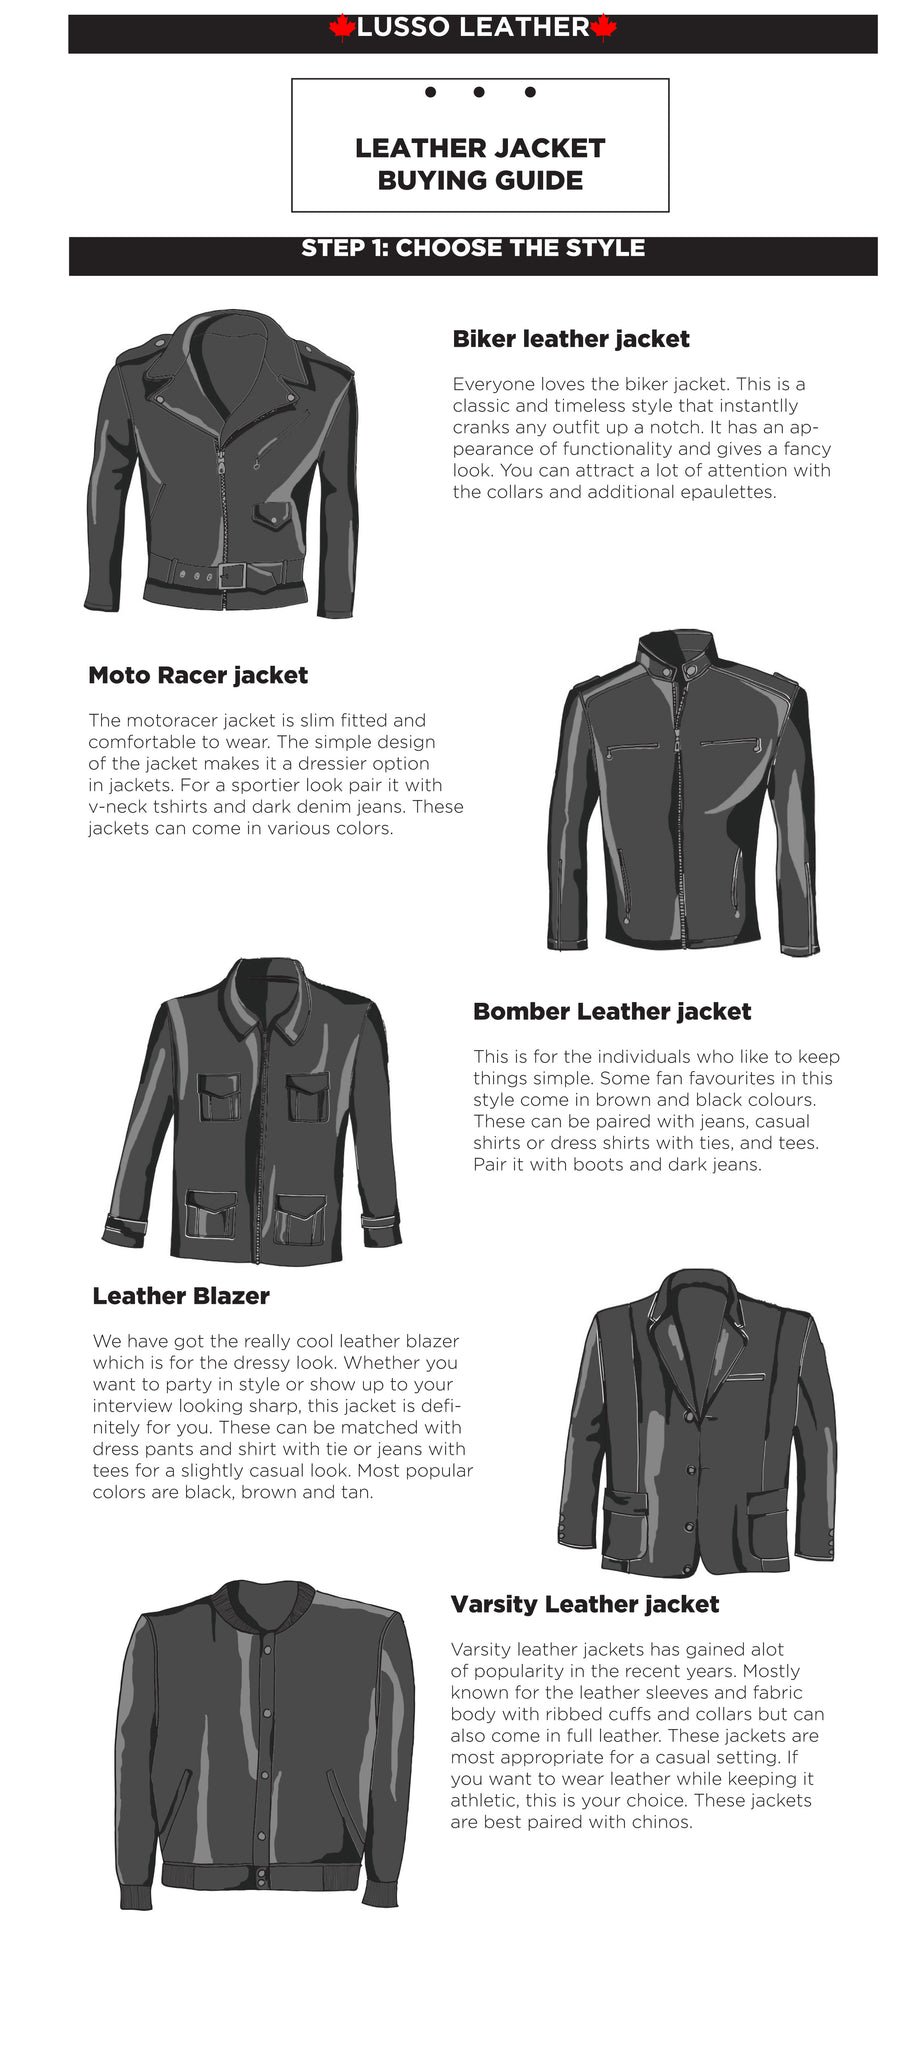 The Ultimate Leather Jacket Buying Guide | Lusso Leather